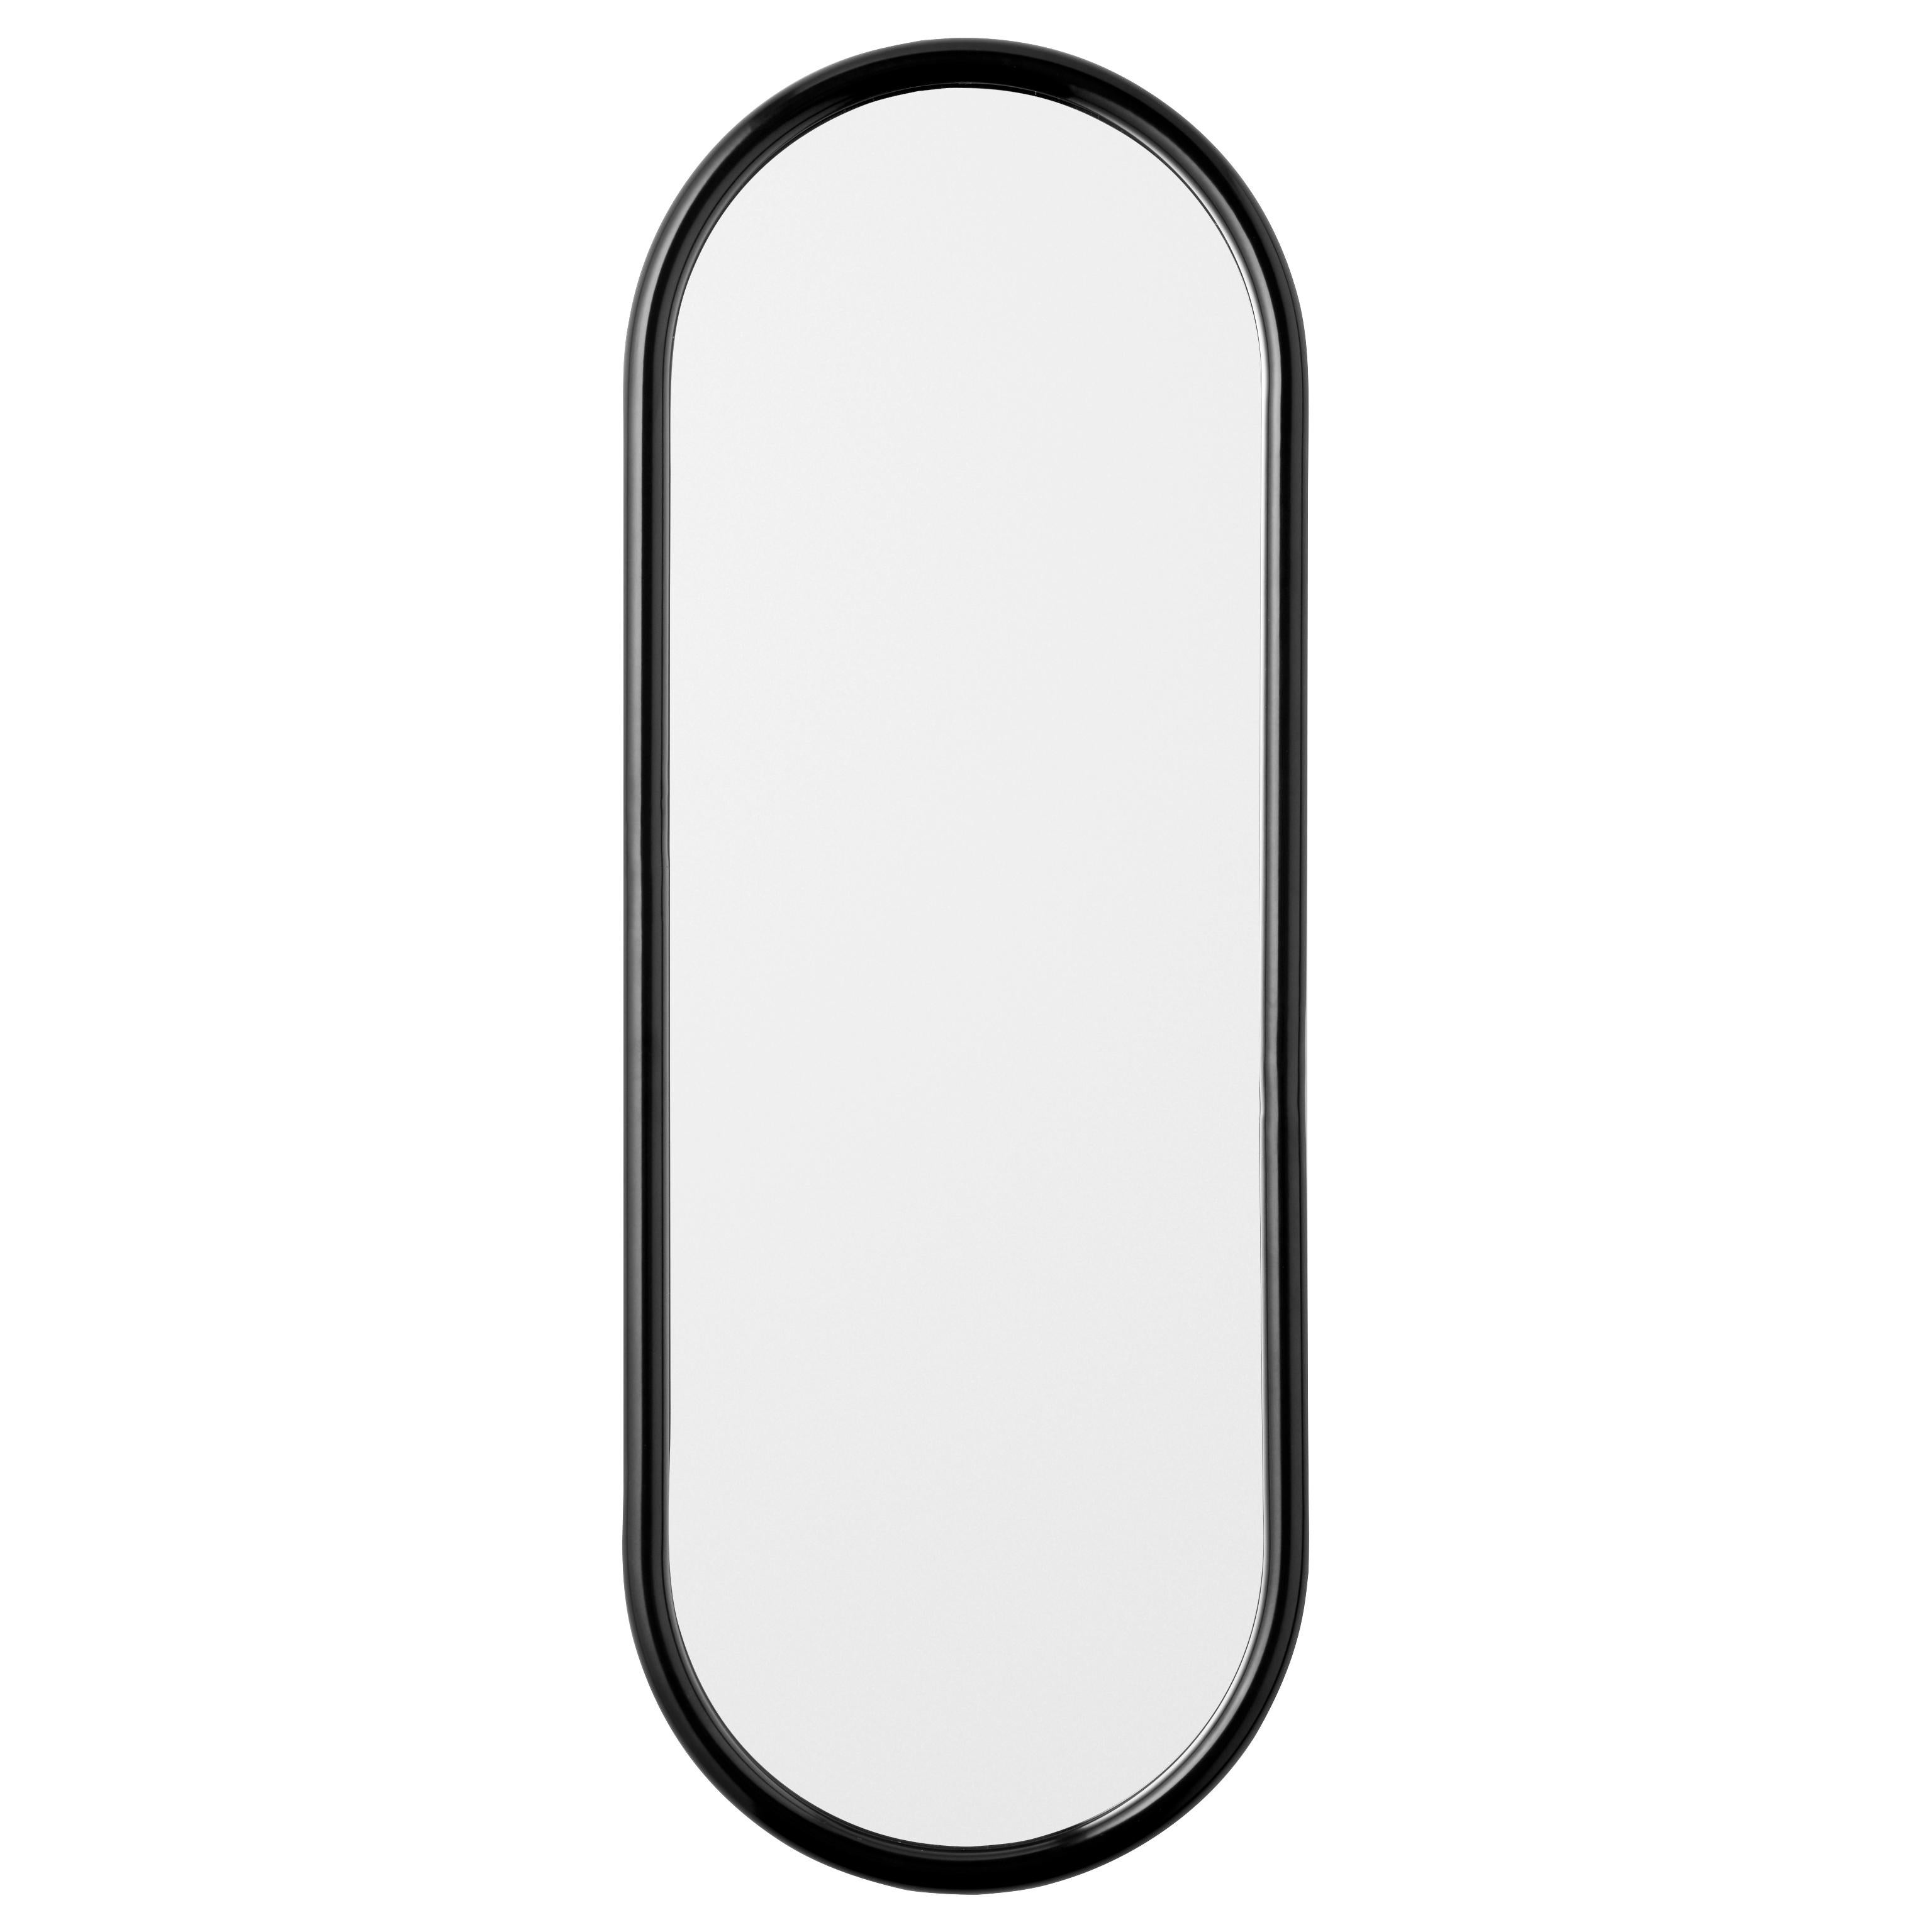 Angui black oval large mirror by AYTM.
Dimensions: 39 x 2 x 108 cm
Materials: Glass, copper, MDF

The Angui mirror with its simple pipe-styled frame is a beauty for any bathroom, hallway, or maybe bedroom. Use a single one or add several